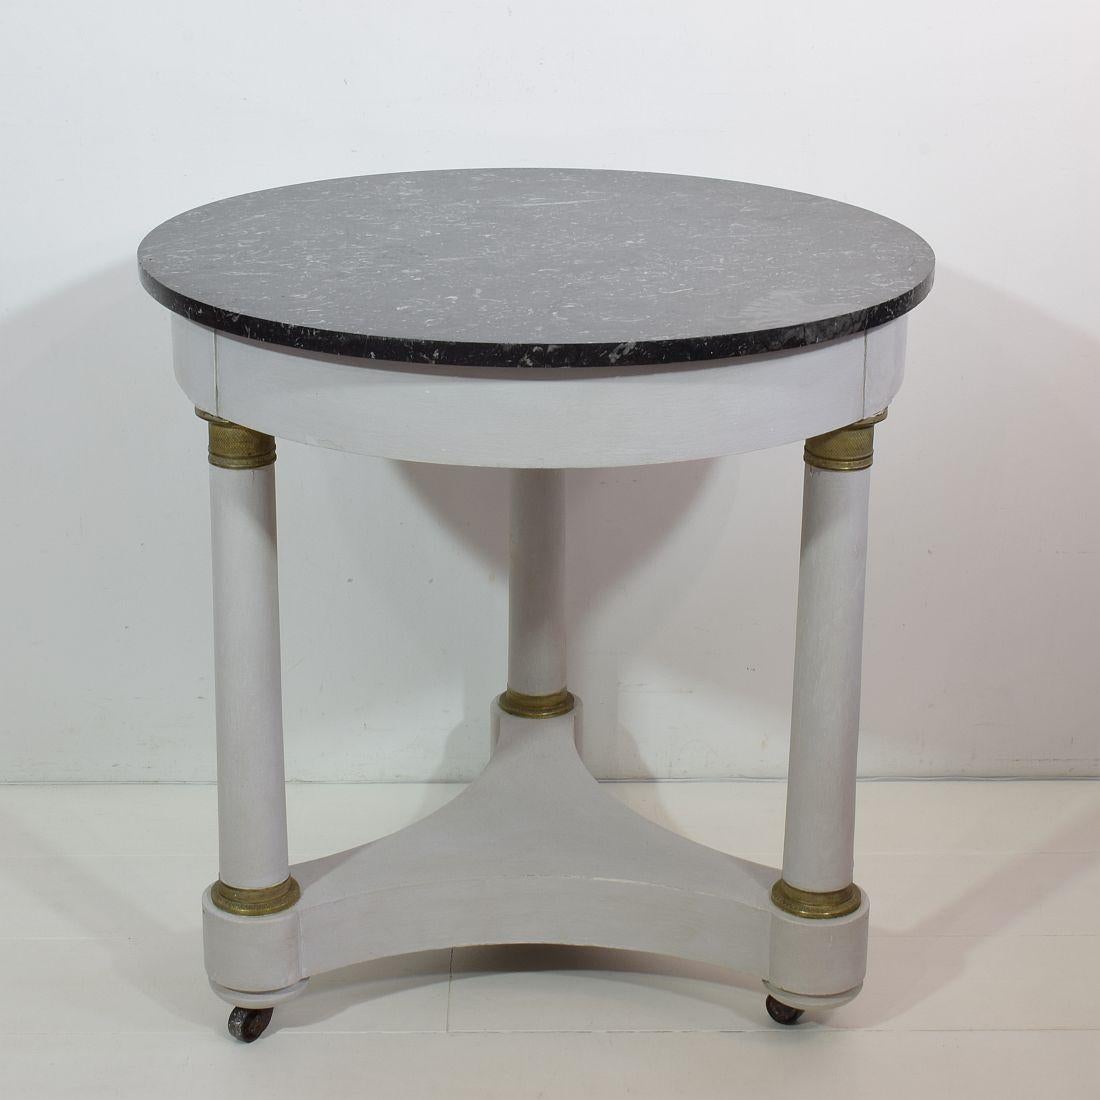 Hand-Crafted French 19th Century Empire Style Gueridon Table with Black Marble Top